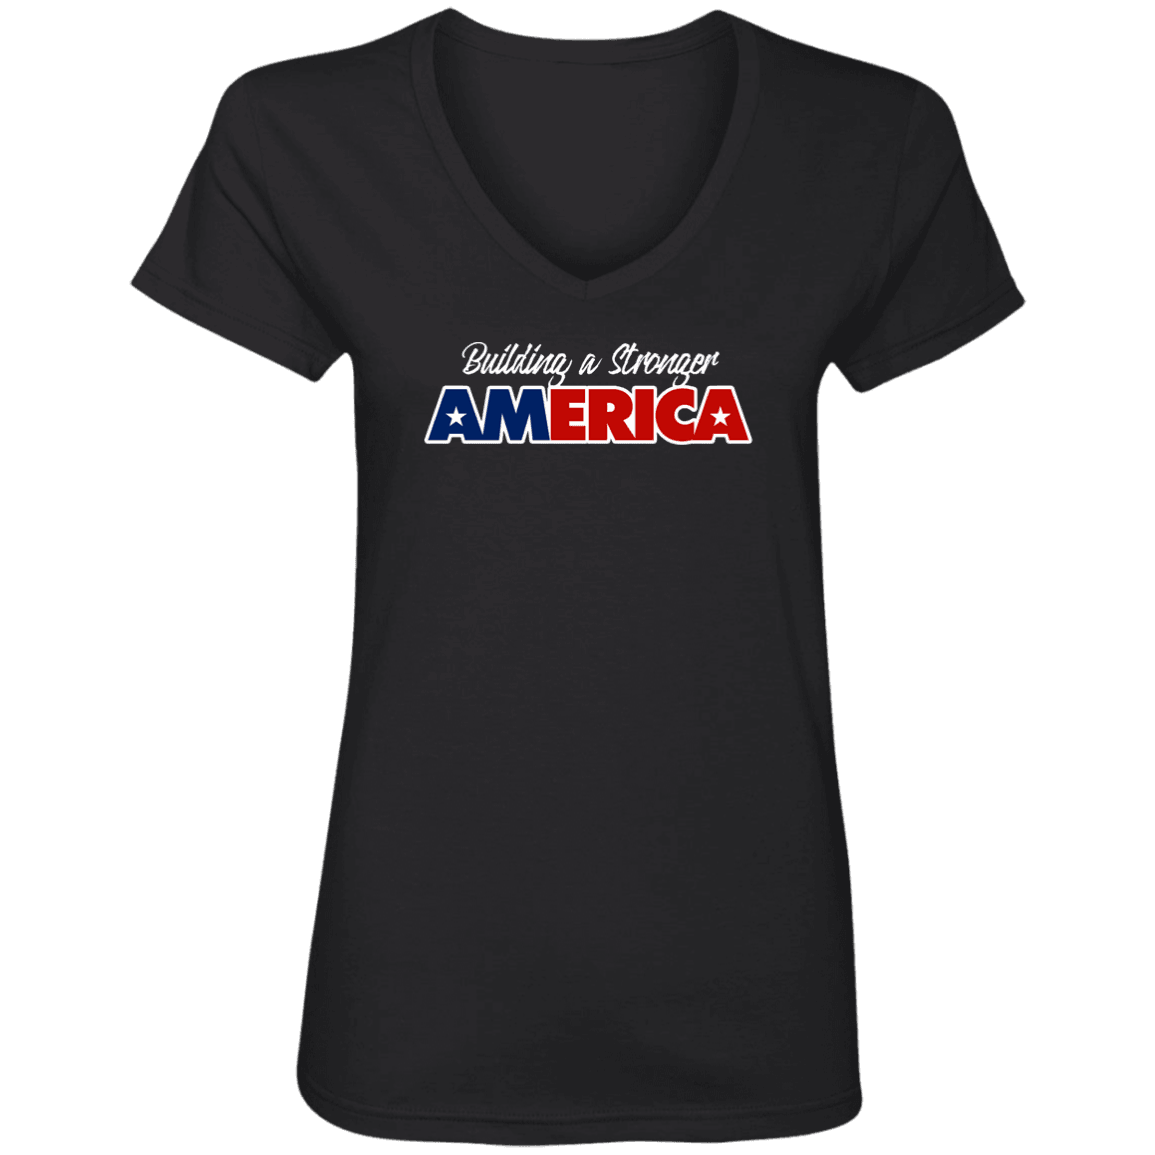 Designs by MyUtopia Shout Out:Building A Stronger America Ladies' V-Neck T-Shirt,Black / S,Ladies T-Shirts